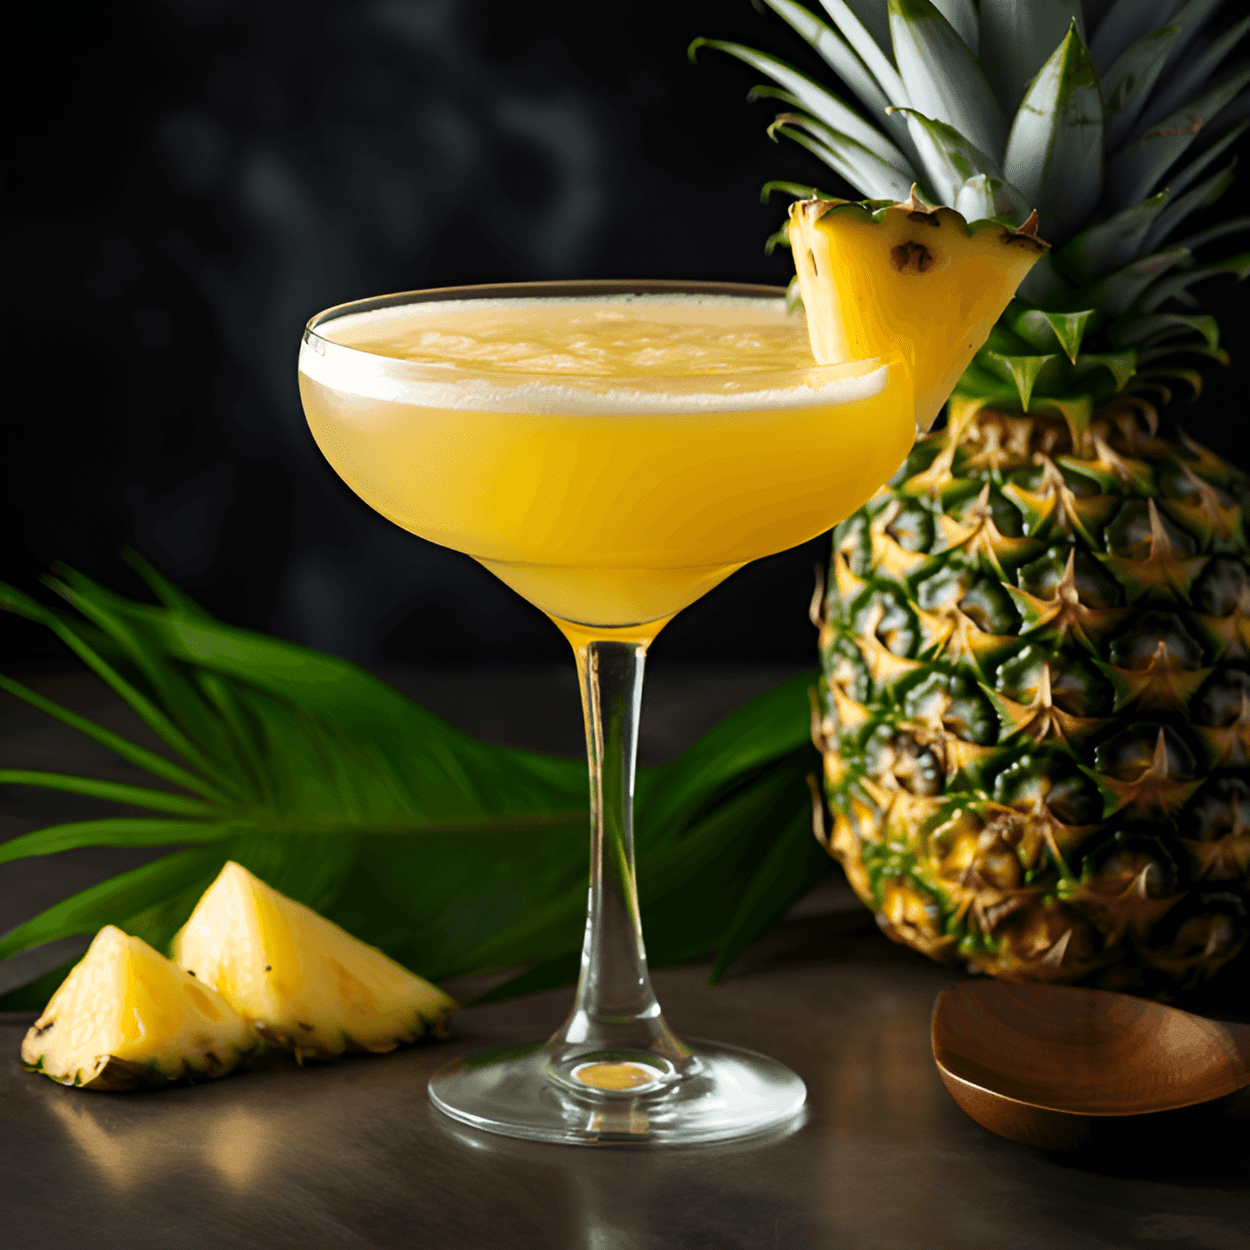 Pineapple Last Word Cocktail Recipe - The Pineapple Last Word is a delightful blend of sweet, sour, and slightly bitter flavors. The pineapple juice adds a tropical sweetness, while the lime juice provides a tangy kick. The gin and green chartreuse give it a complex, herbal undertone.